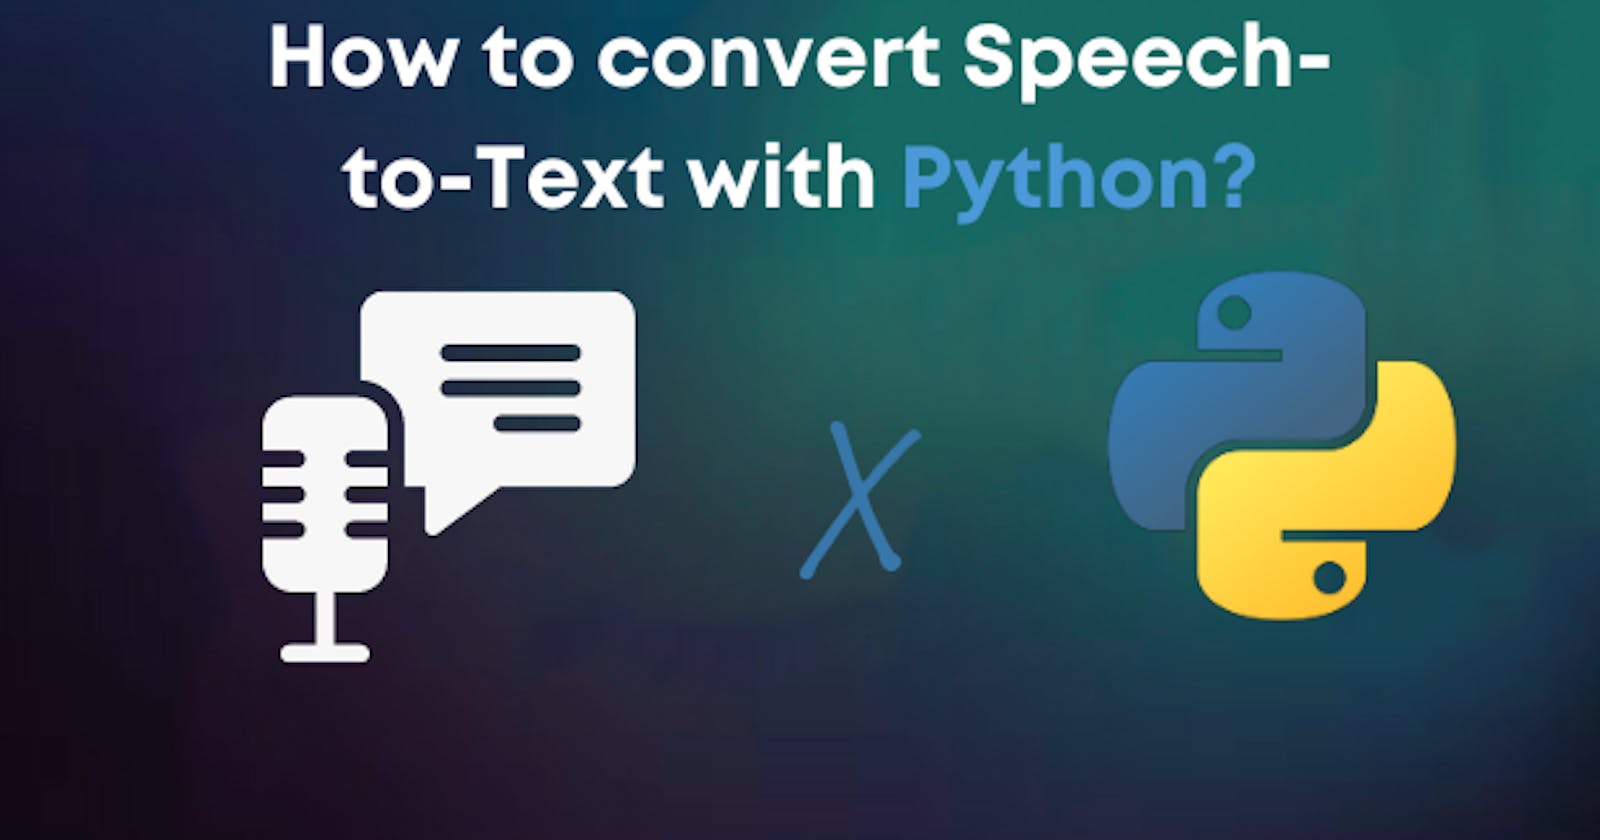 How to convert Speech-to-Text with Python?